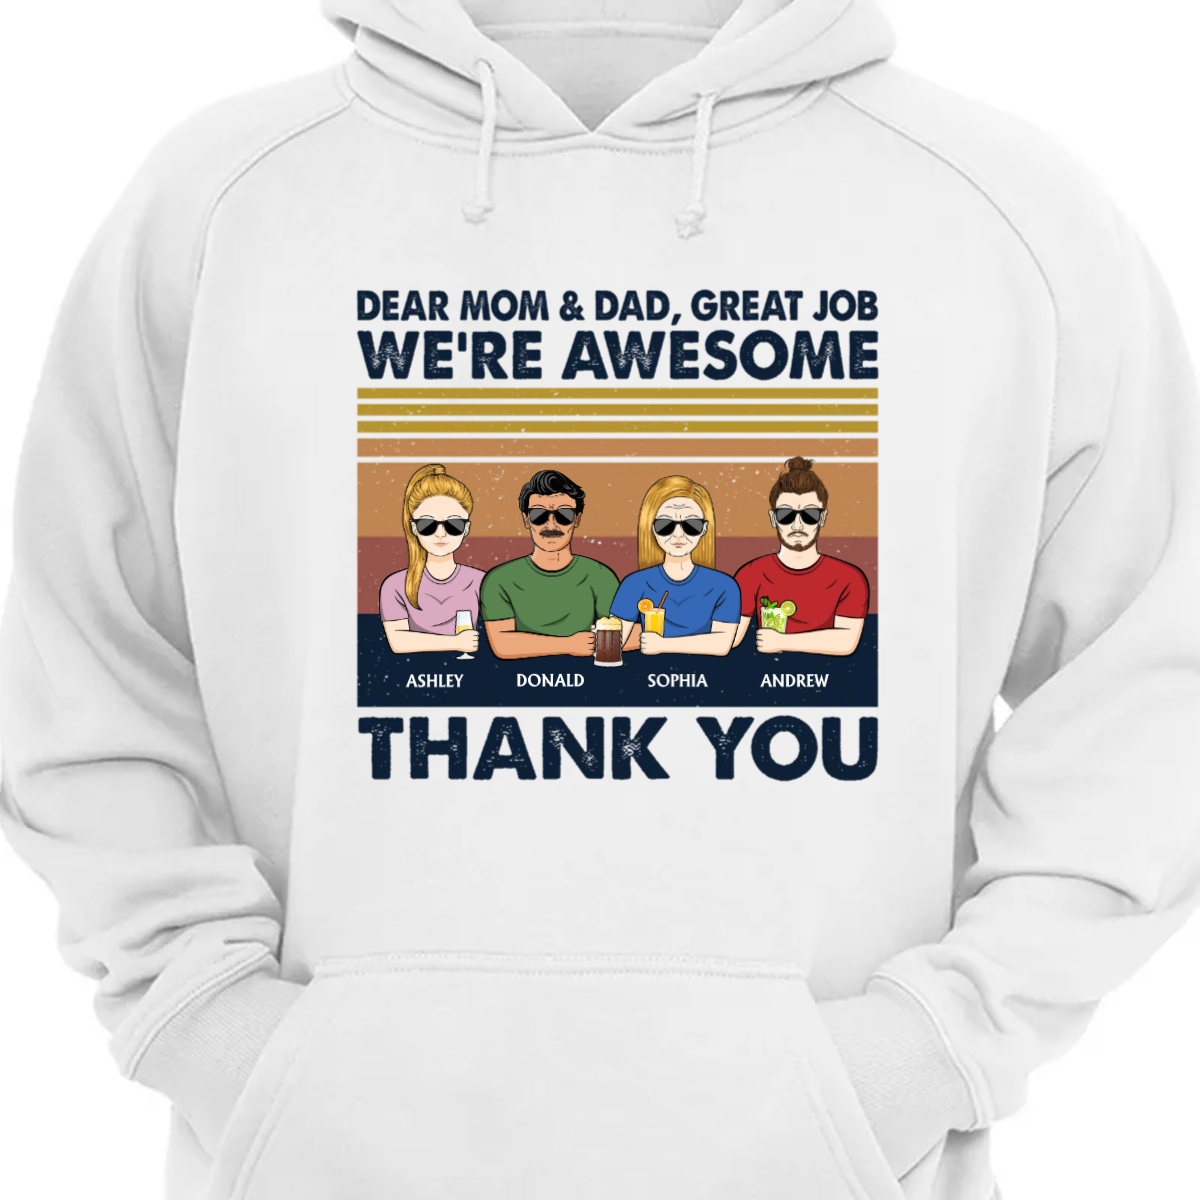 Dear Dad And Mom Great Job I'm Awesome Thank You - Father Gift - Personalized Custom Hoodie Sweatshirt